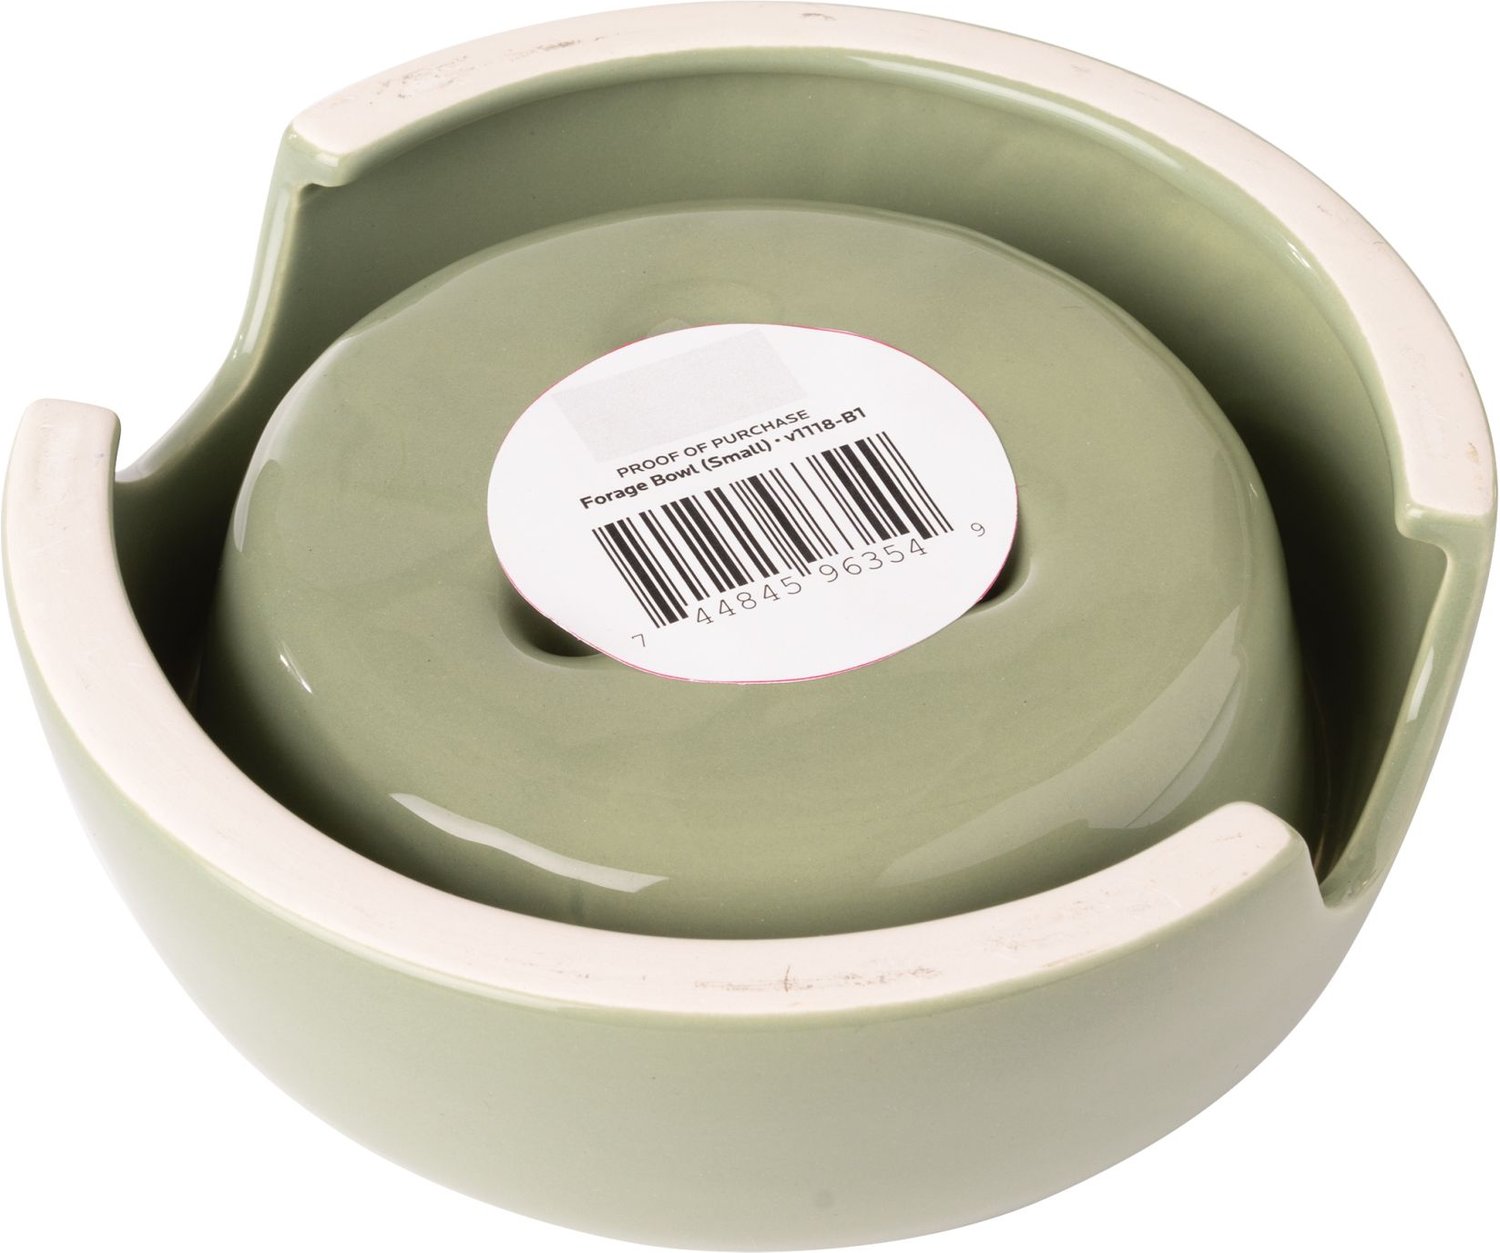 Oxbow Enriched Life Forage Bowl Small For Small Animals